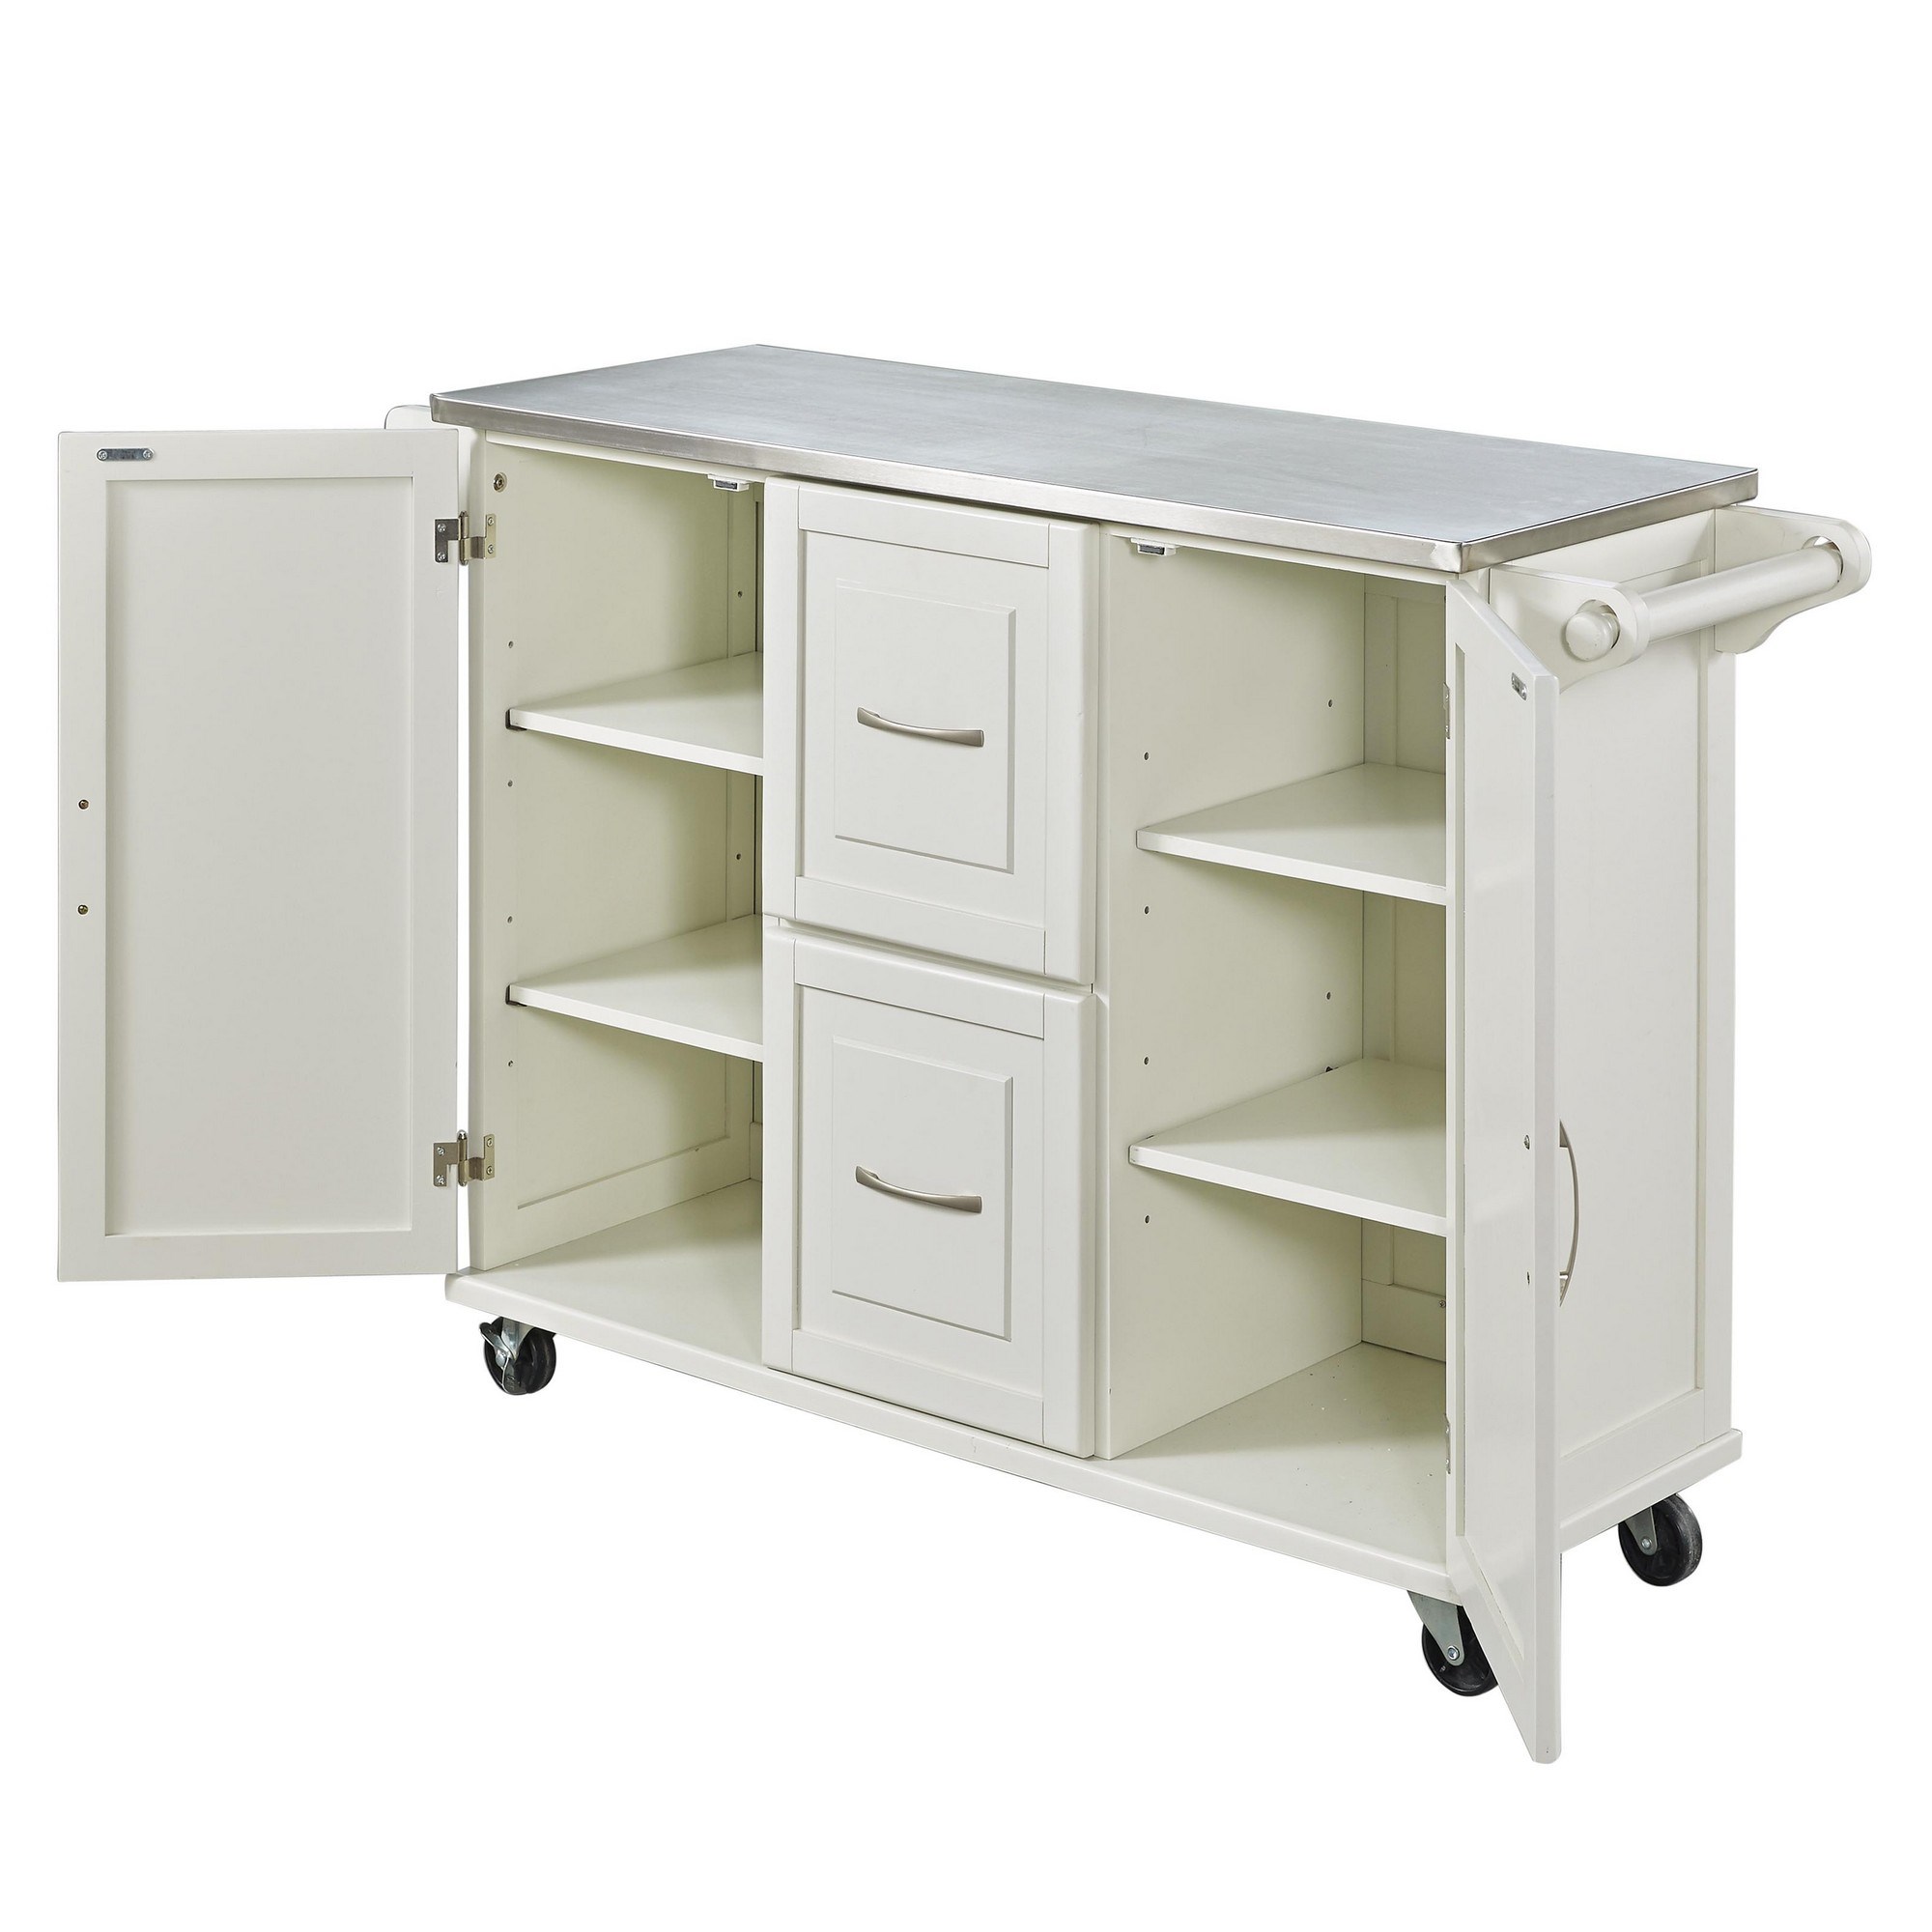 Item 5099 - Base Cabinet with Locking Doors, 36 Inch